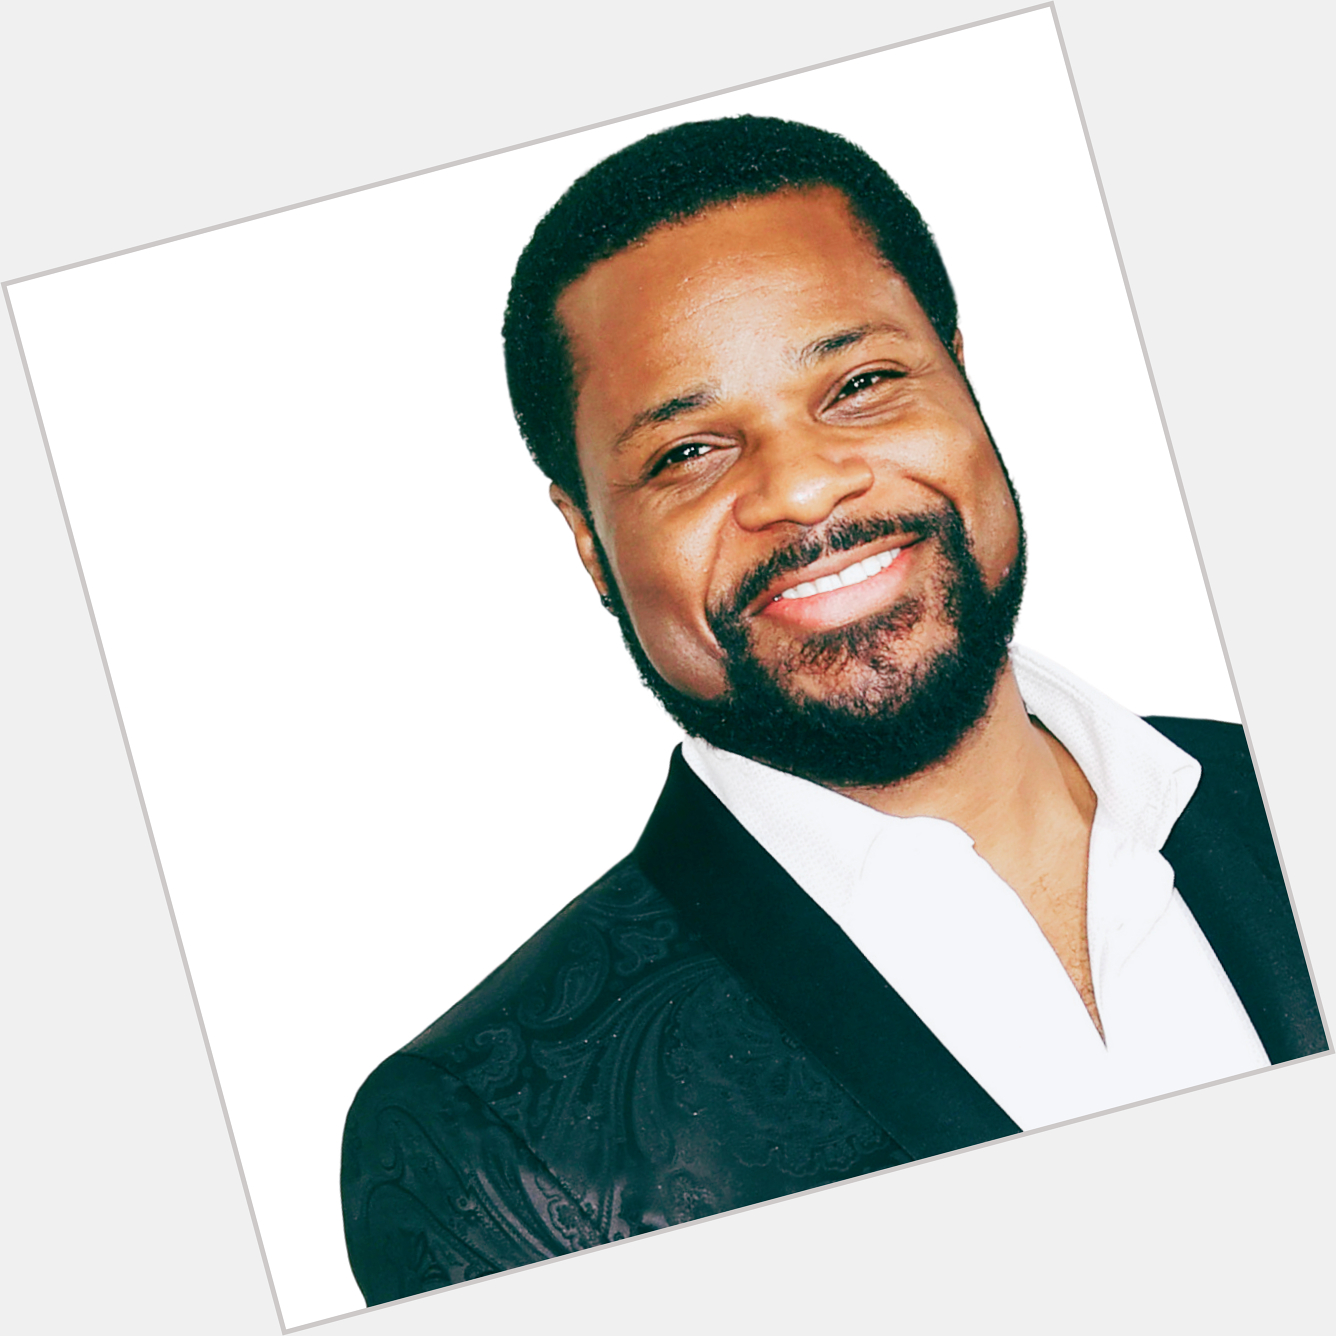 How many people thought this was your brother growing up? Wish Malcolm-Jamal Warner a Happy Birthday! 